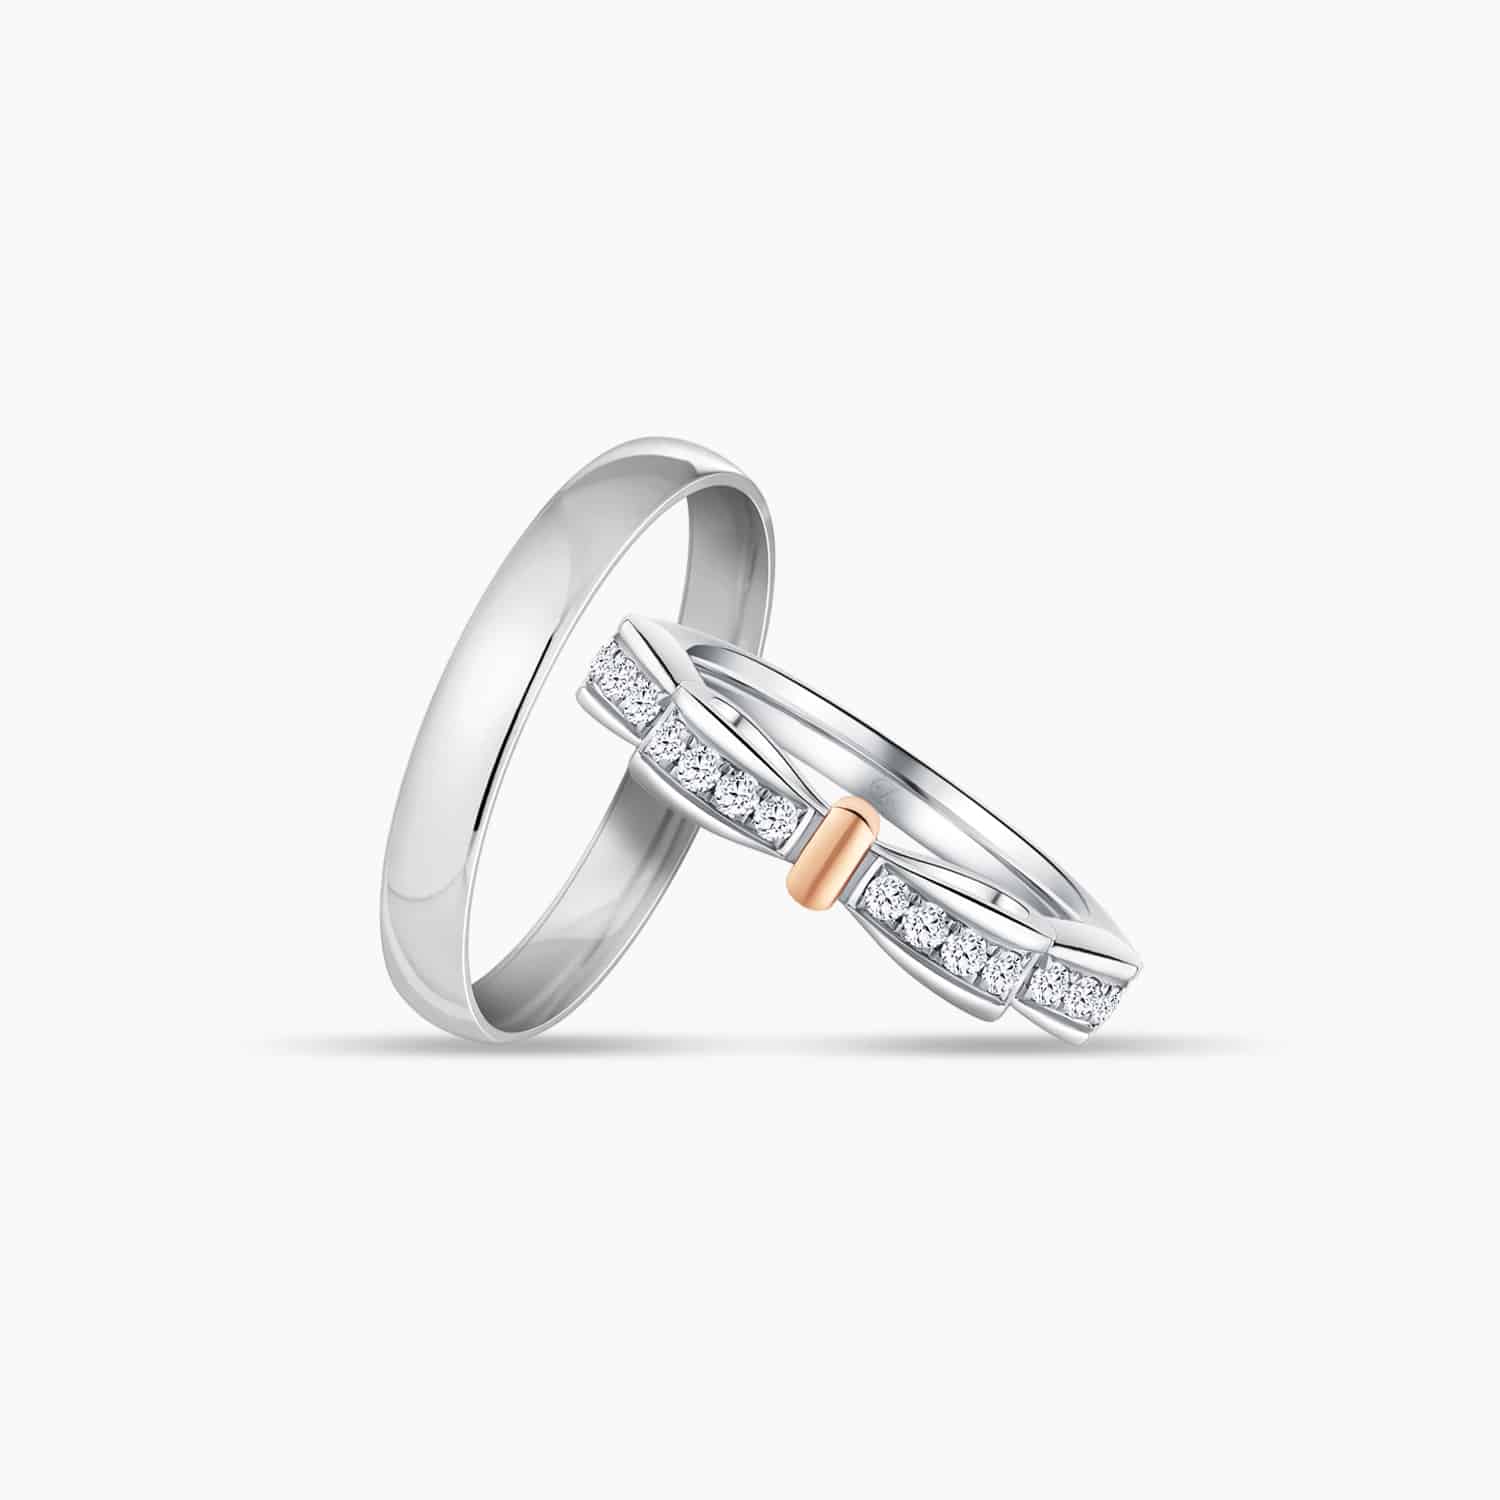 LVC NOEUD BOW WEDDING BAND WITH A ROSE GOLD KNOT AND DIAMONDS a set of white gold engagement wedding ring or wedding bands in white and rose gold with diamonds 钻石 戒指 cincin diamond